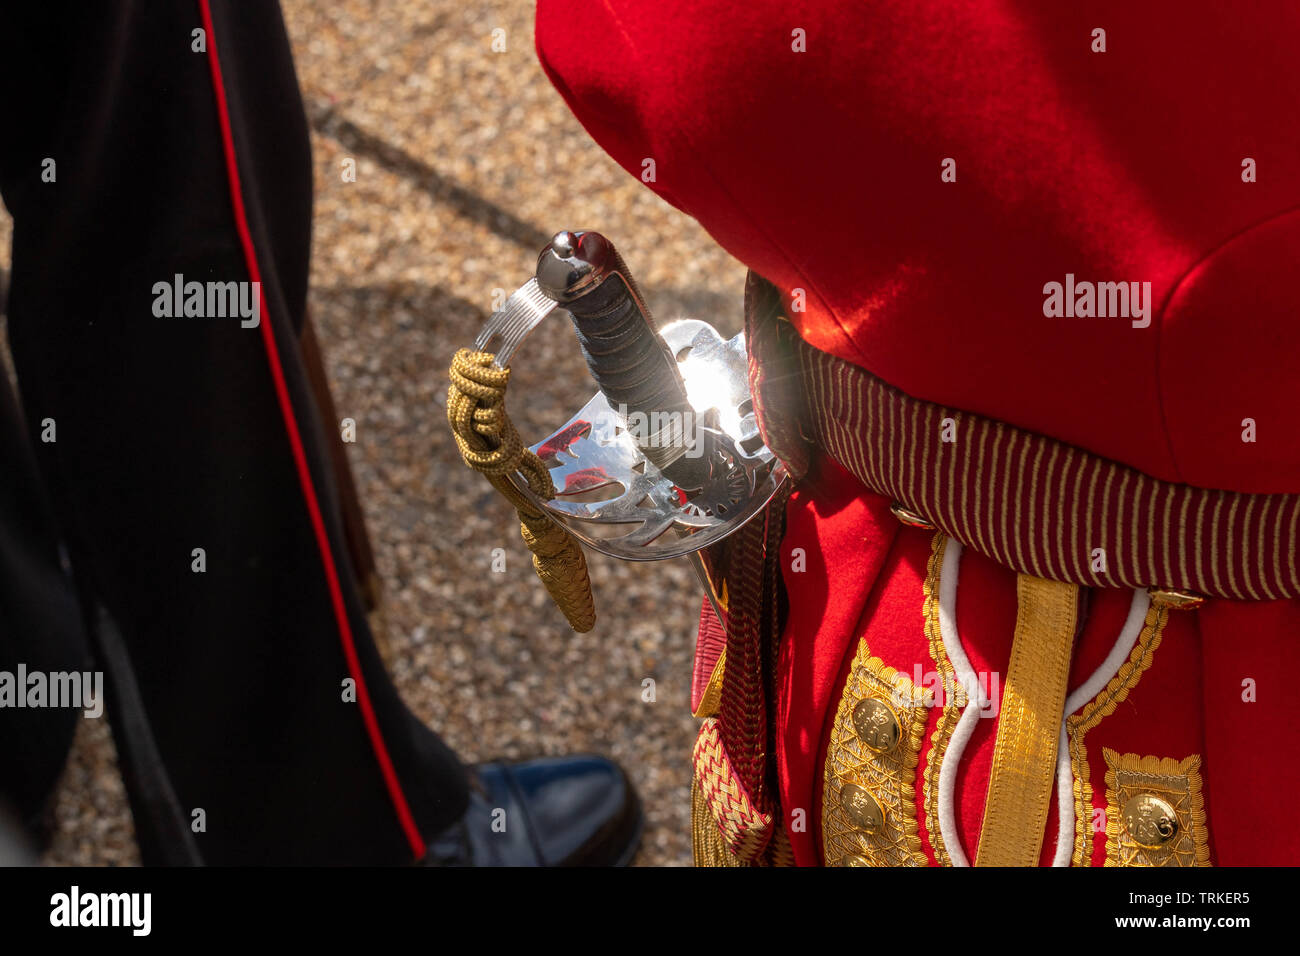 London, UK. 8th June 2019 Trooping the Colour 2019, The Queen's Birthday parade on Horseguards Parade London in the presence of Her Majesty The Queen.  Colour trooped by the 1st Battalion Grenadier Guards  Officer's sword at the Trooping  Credit Ian Davidson/Alamy Live News Stock Photo